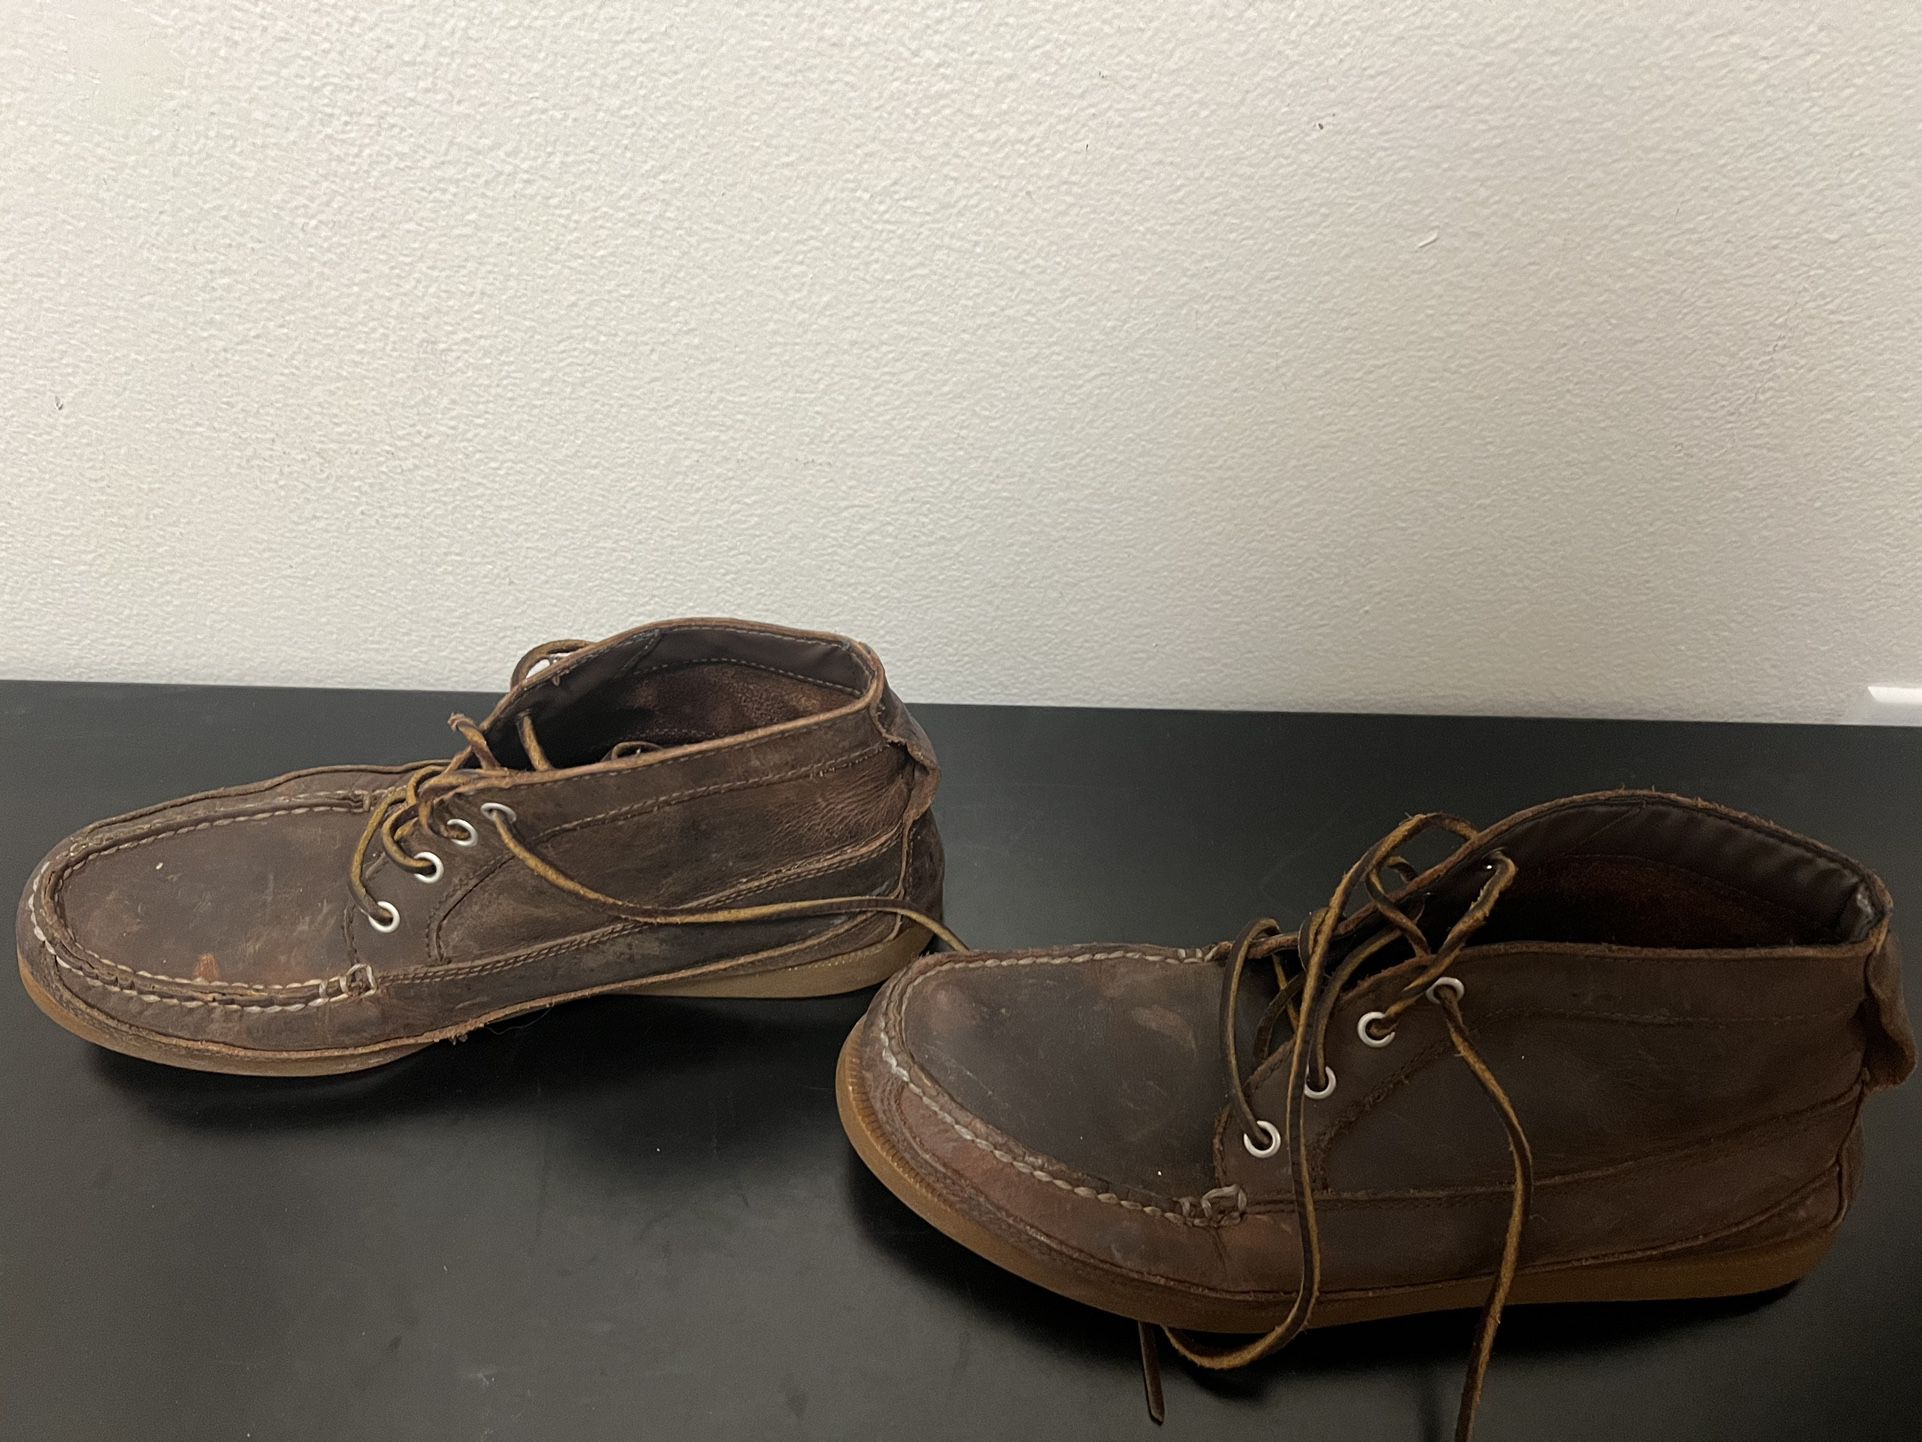 Sperry Topsider Boots